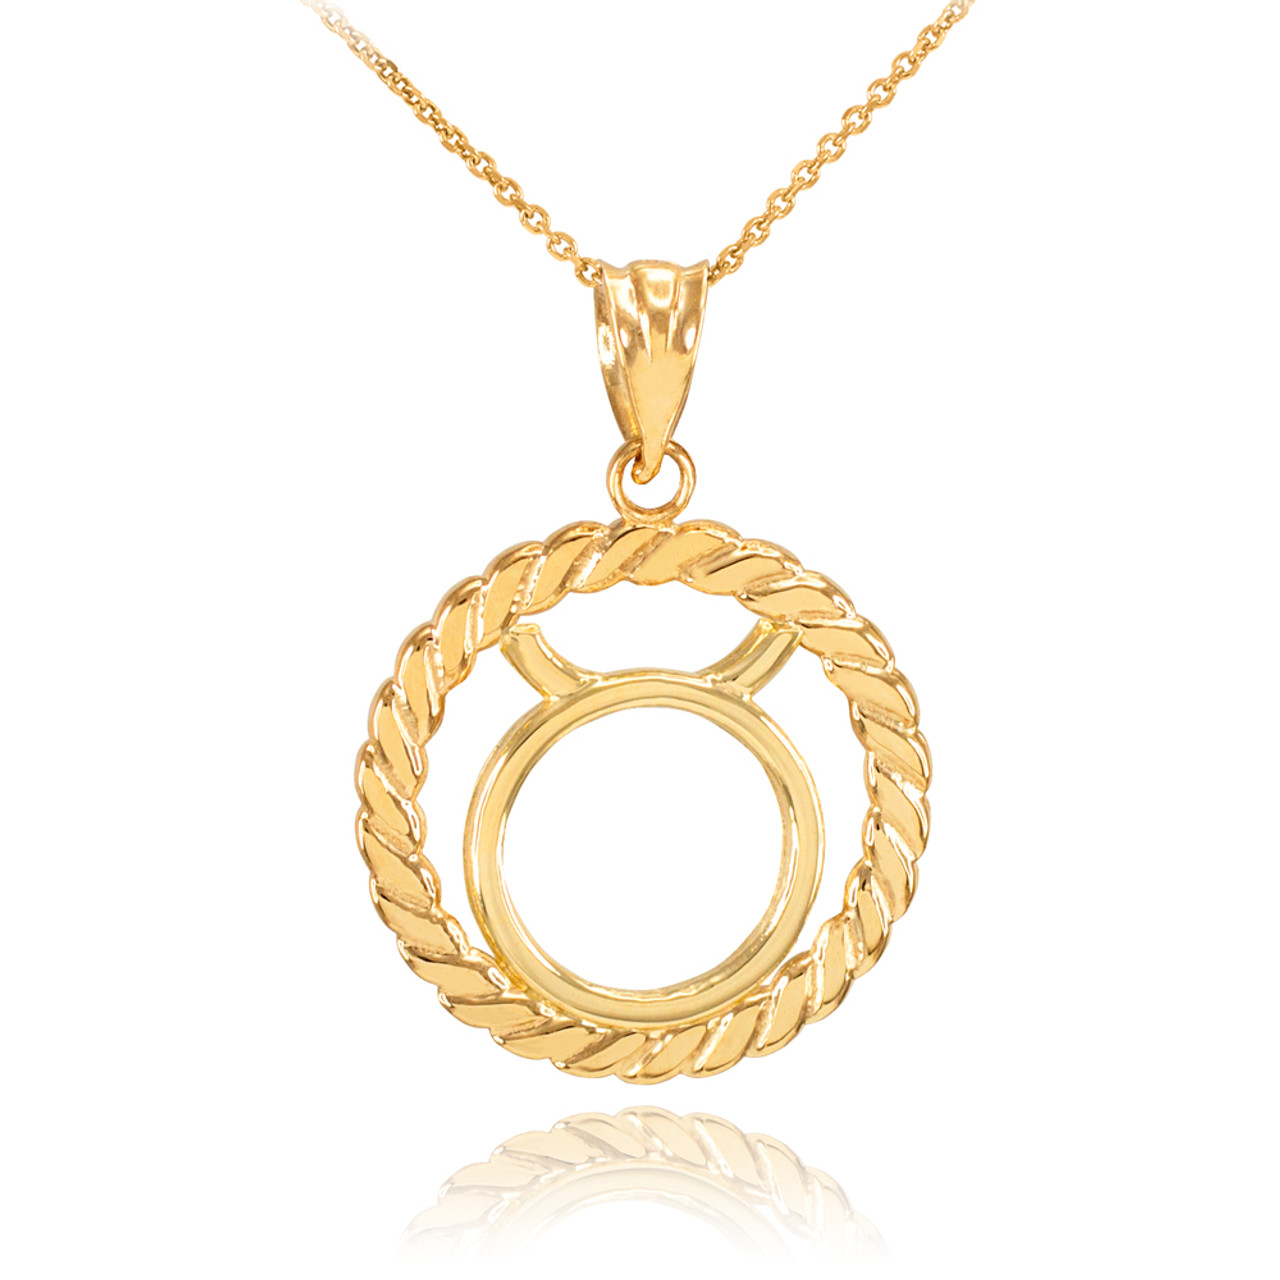 Royal Chain 14K Gold Taurus Necklace C16204-18 | W.P. Shelton Jewelers |  Ocean Springs, MS